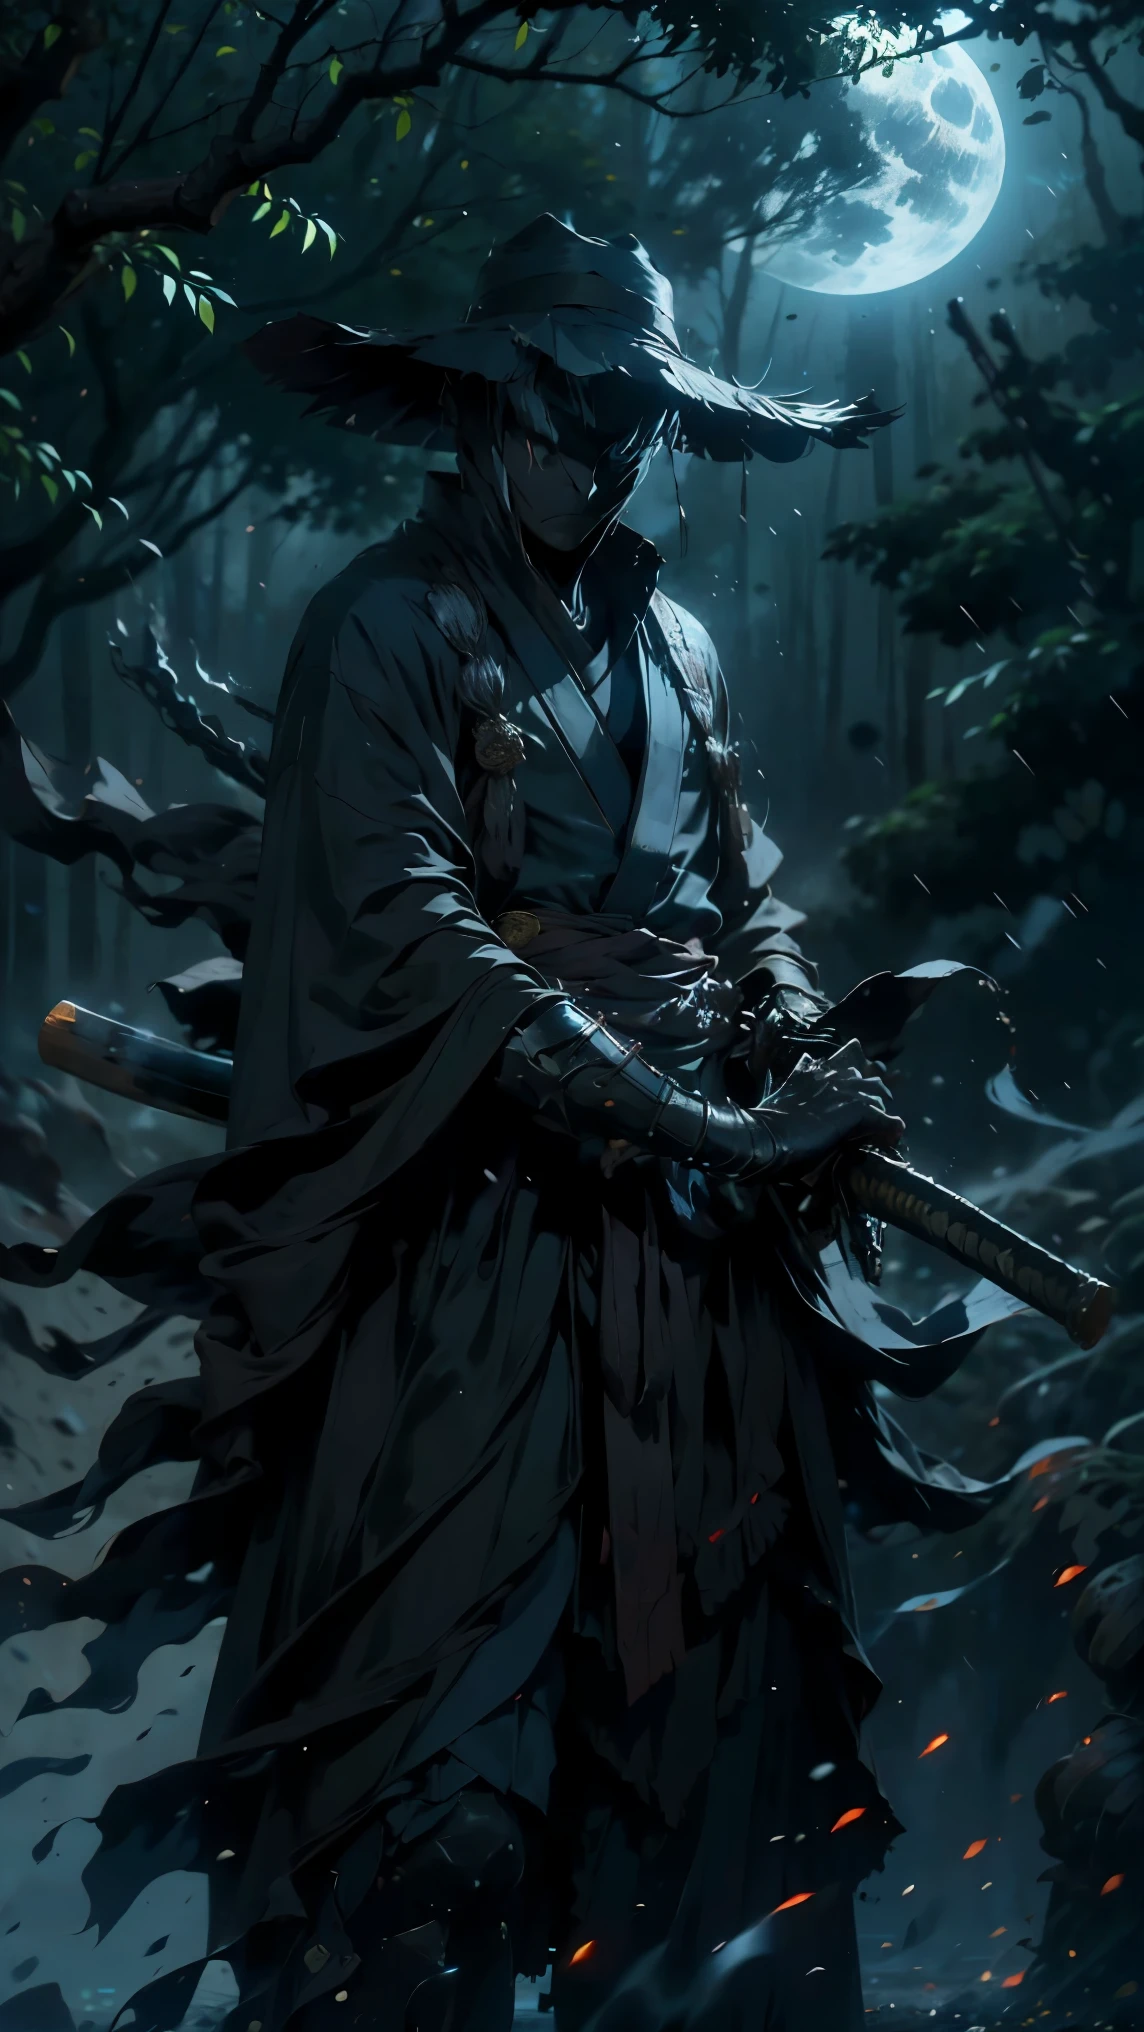 (Best Quality,ultra detailed),dark,wet,artificial raindrops falling,ancient japanese warrior standing in the rain,japanese traditional bamboo hat(fail),dense forest landscape,majestic and serene nature,full moon shining brightly in the night sky,black kimono with fluorescent red stripes that glow in the moonlight,samurai sword sharpened and drawn(katana),